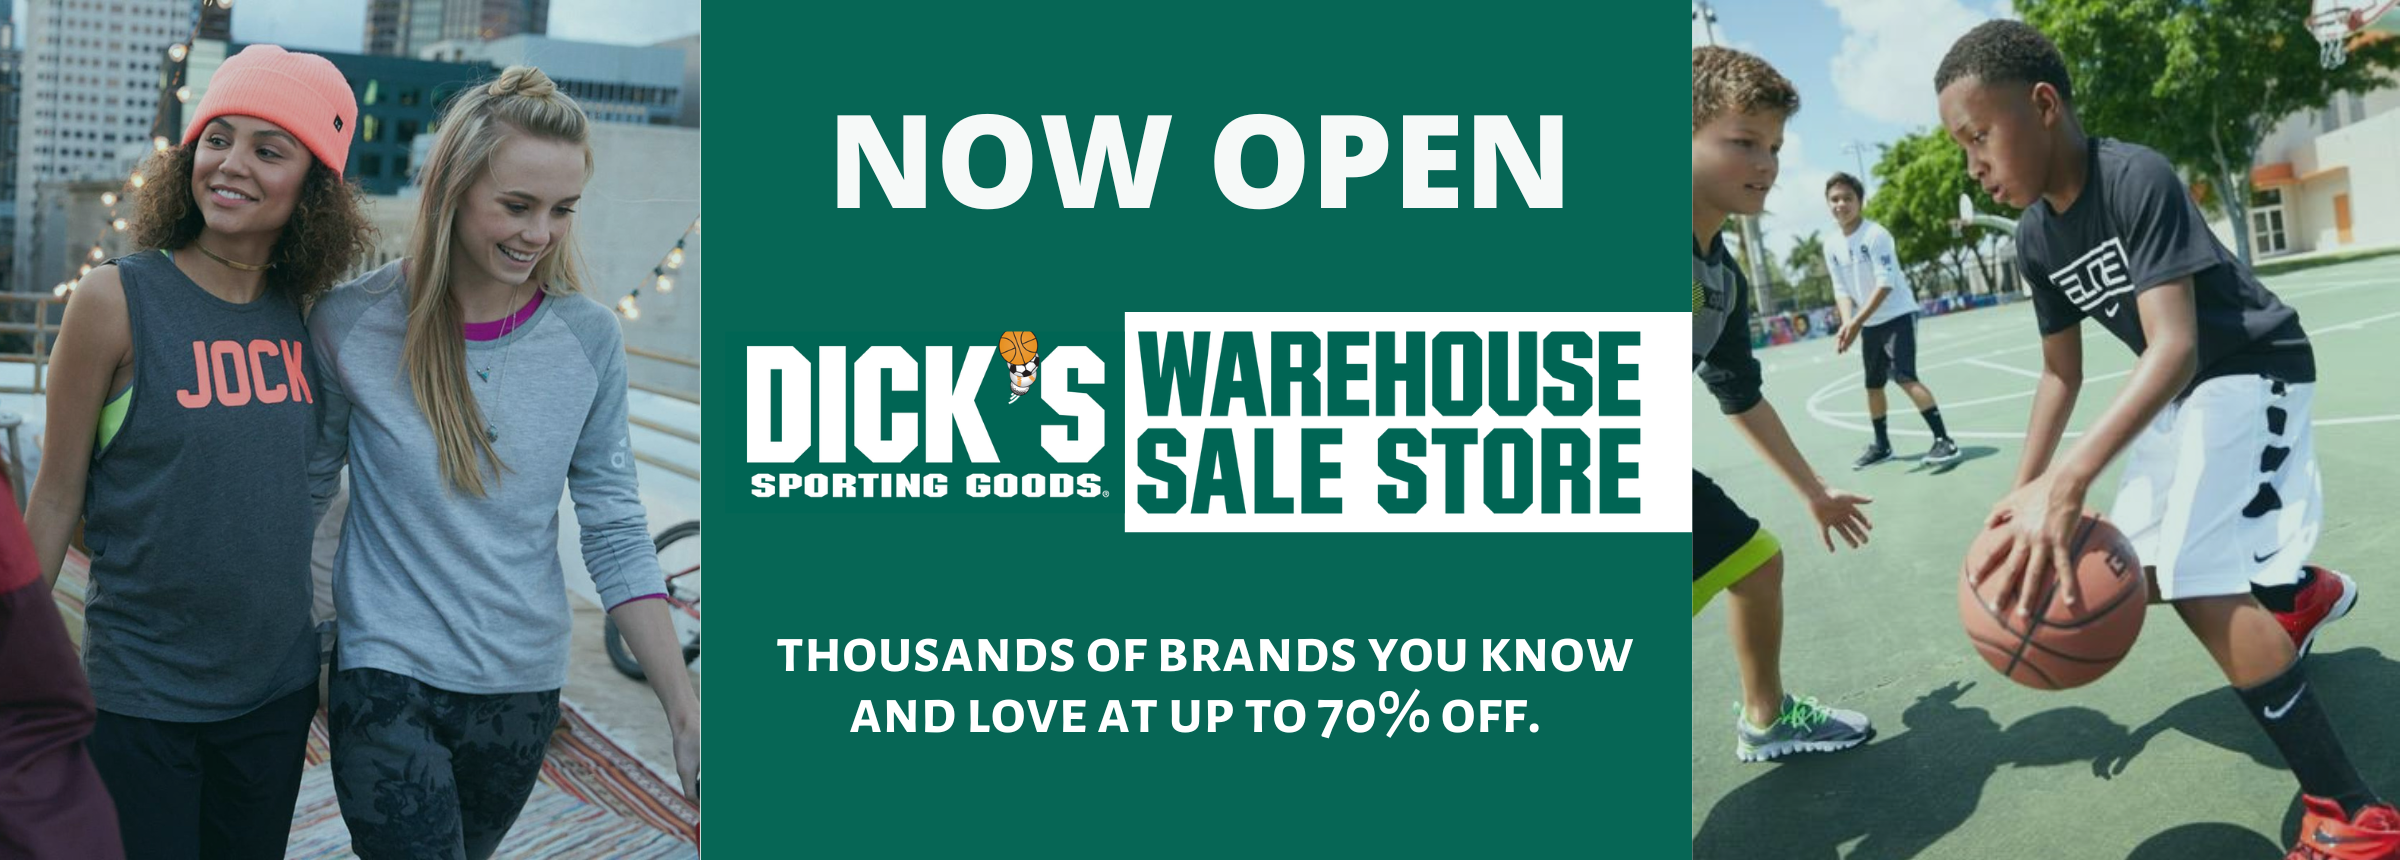 Dick's Warehouse Sale Store now open. Click to learn more.